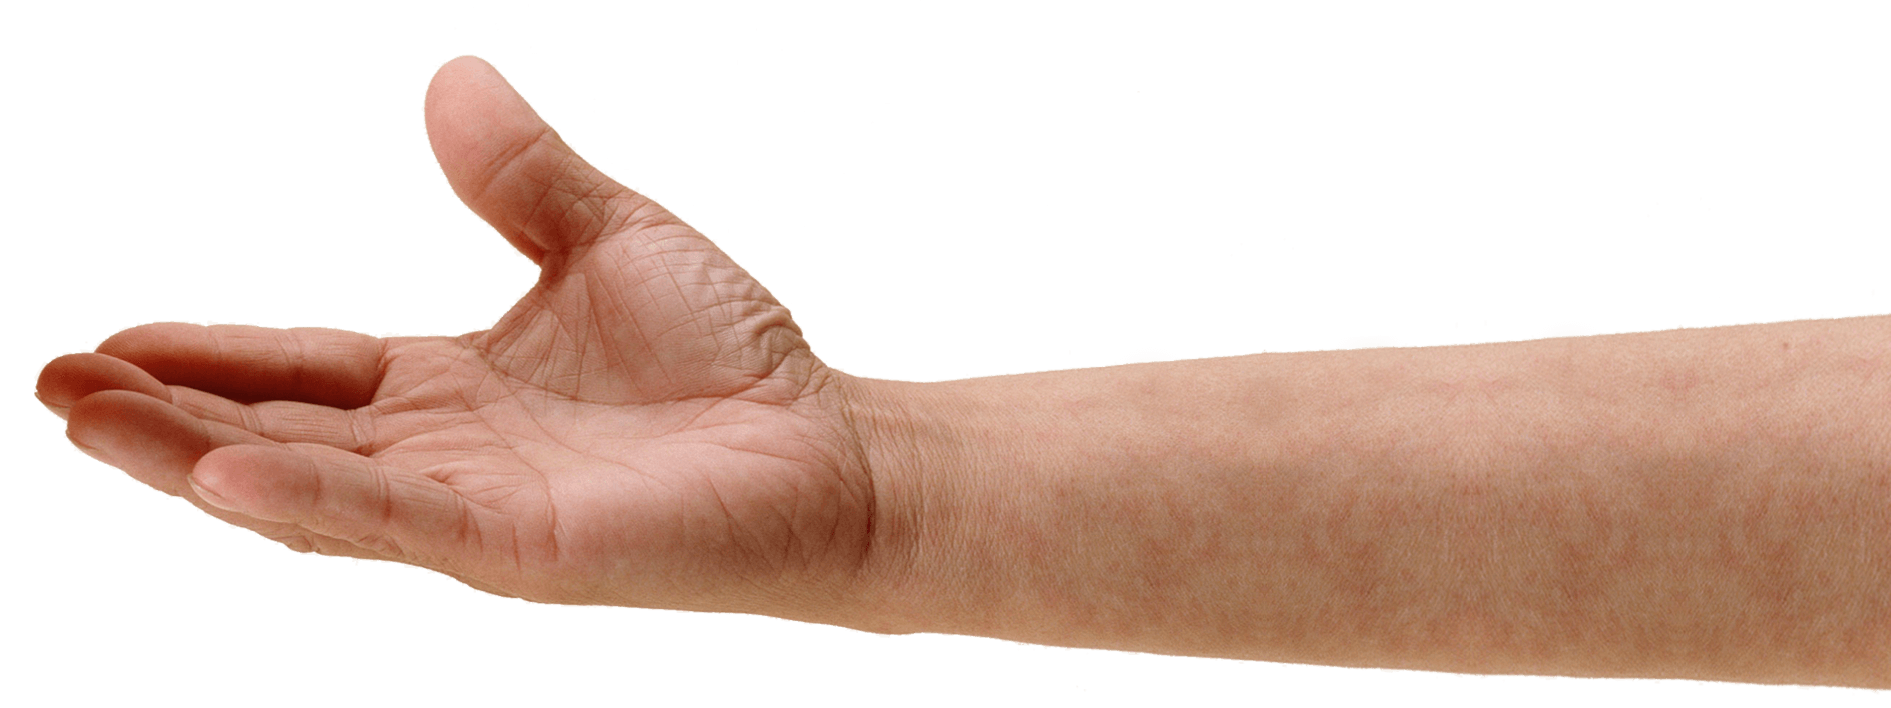 Hand.png (1891×708) - Hands, Transparent background PNG HD thumbnail